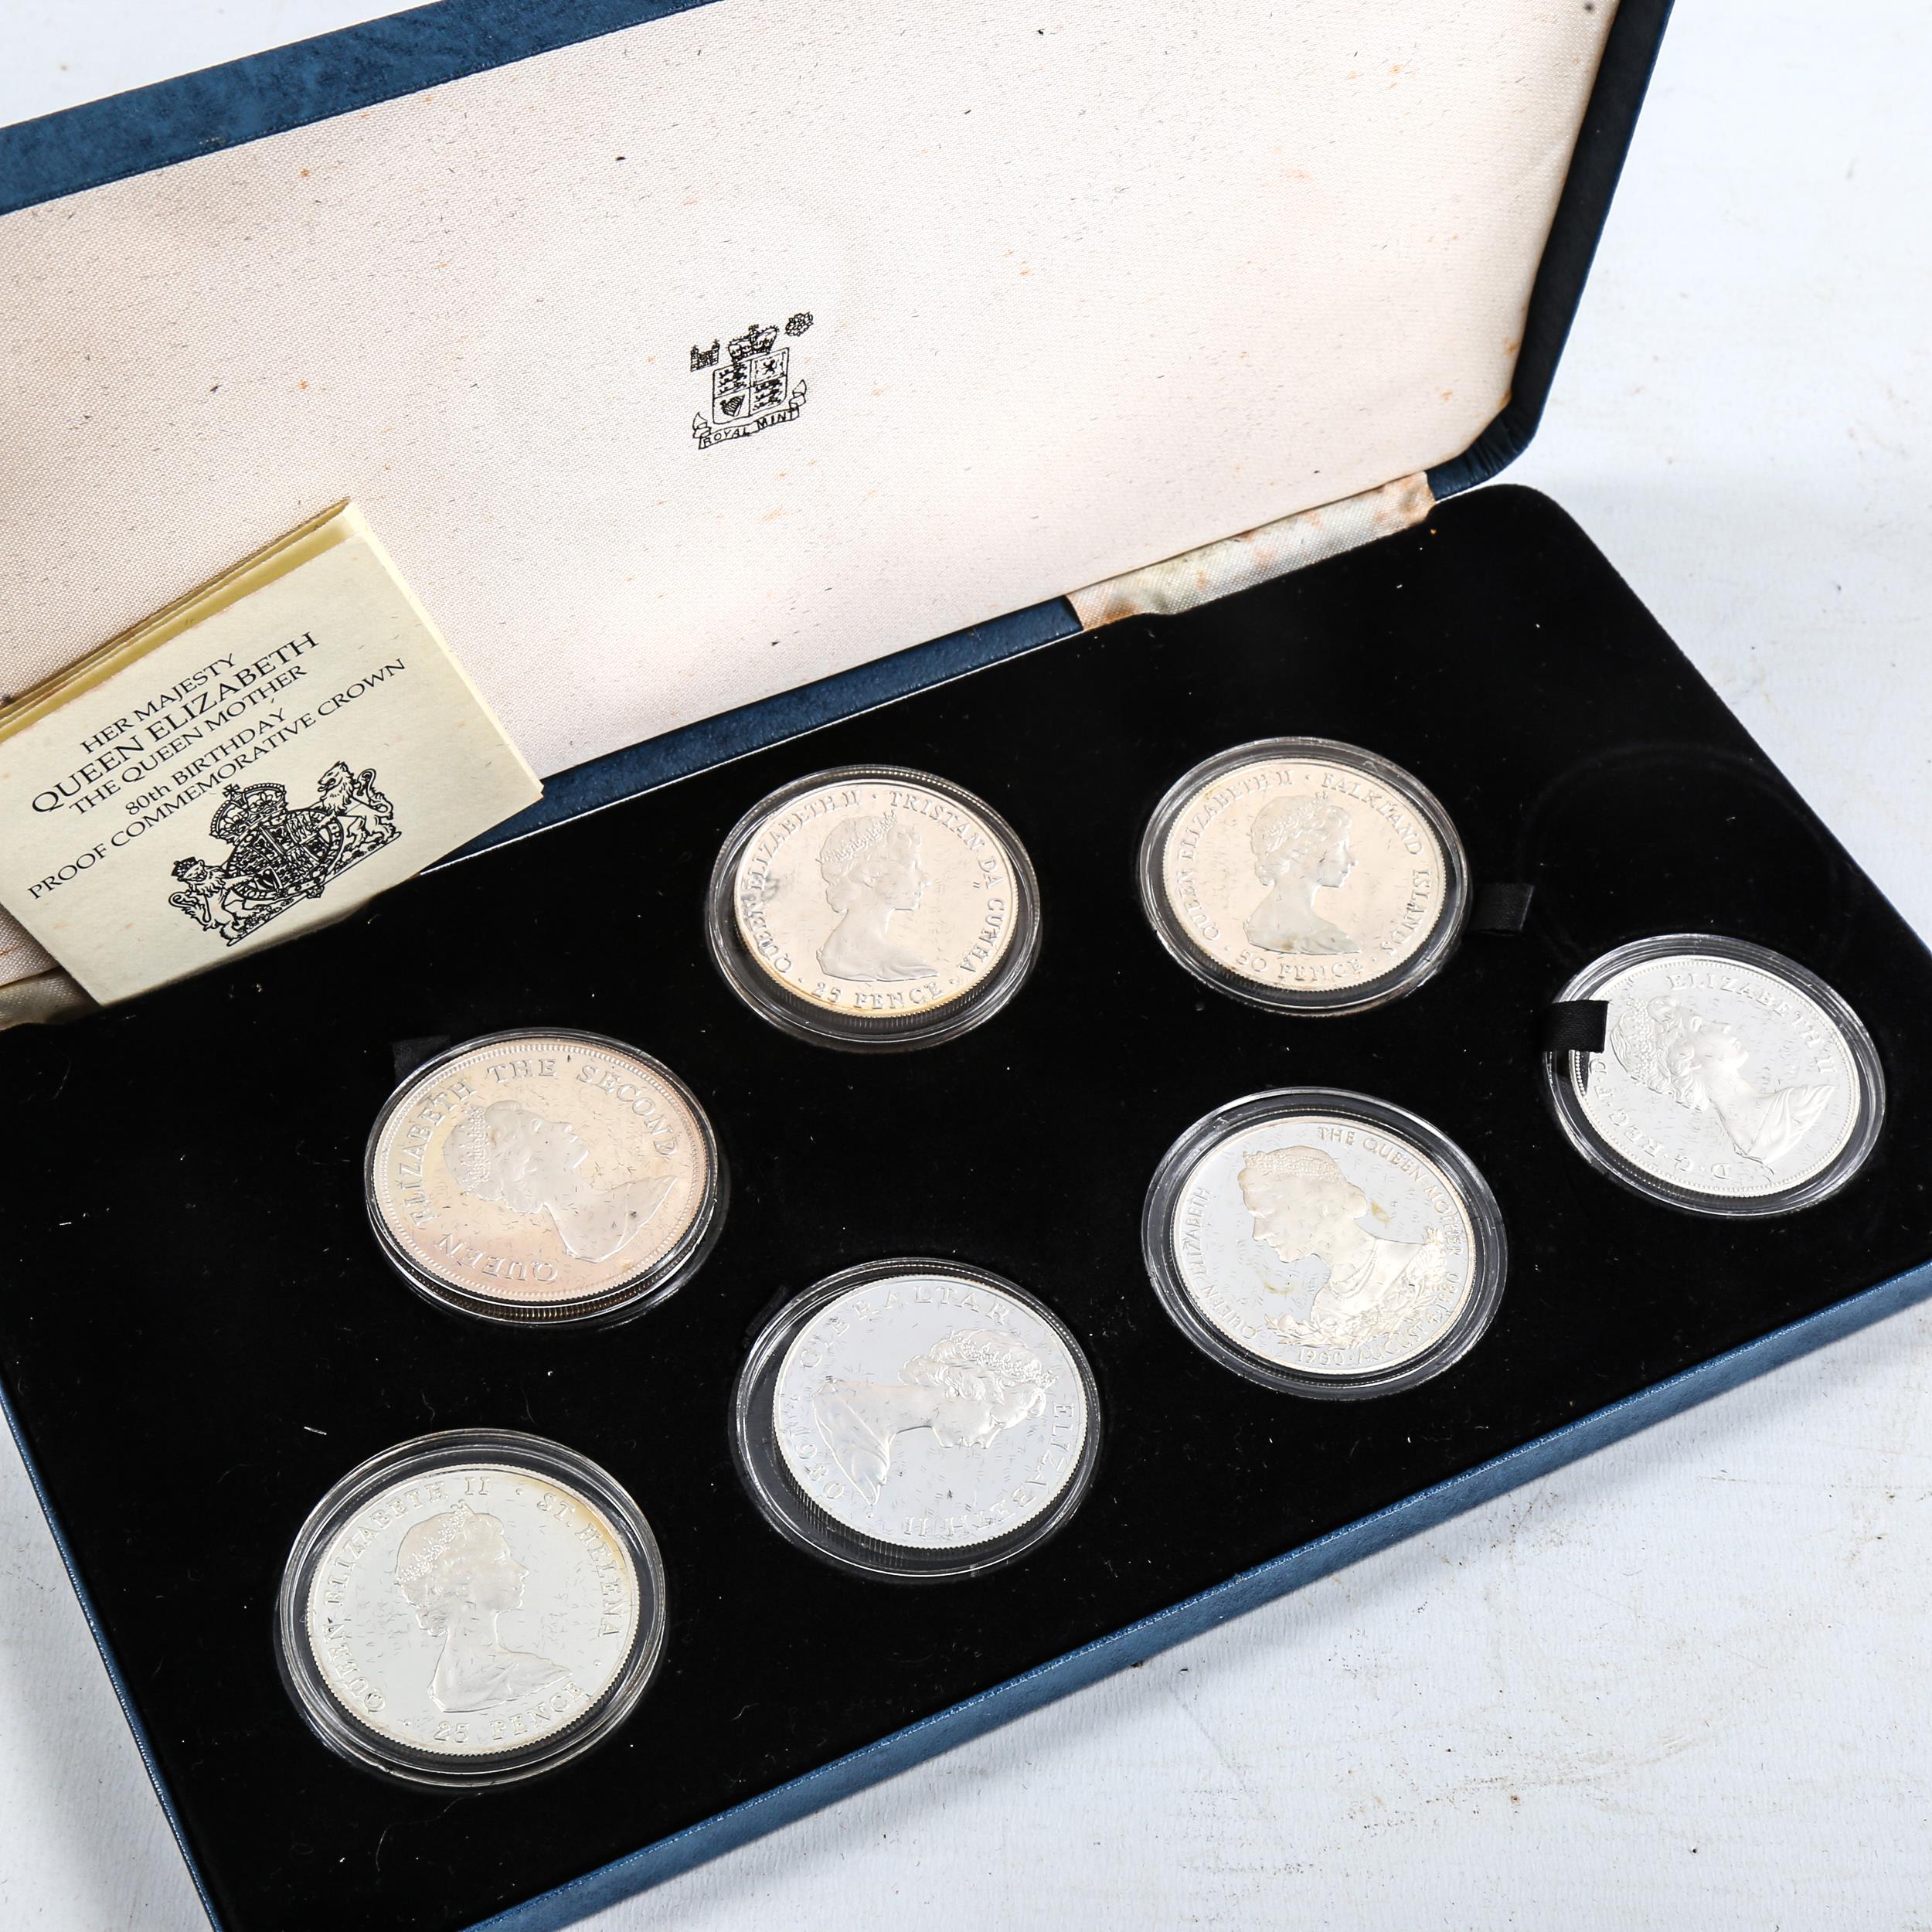 A set of 7 Queen Elizabeth The Queen Mother 80th Birthday proof commemorative crown coin set, by The - Image 3 of 3